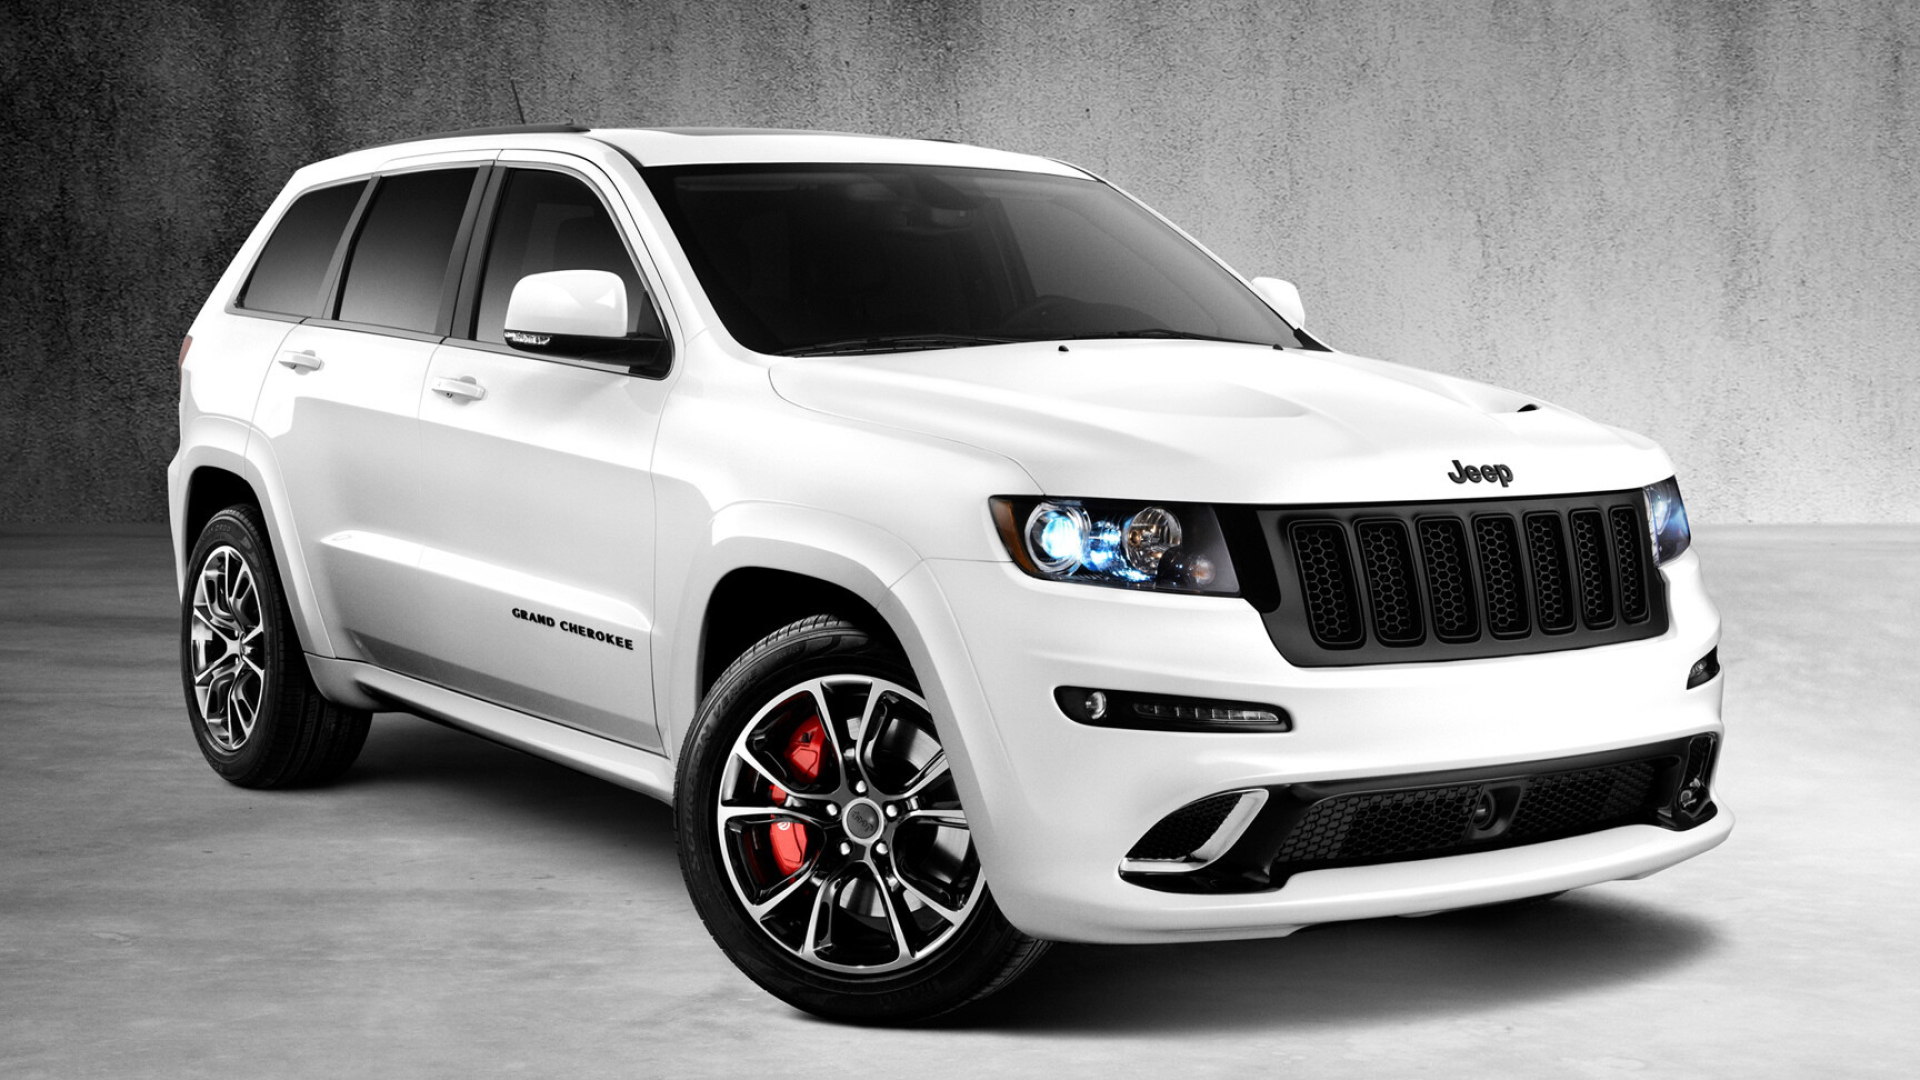 Jeep: The fourth-generation WK2 Grand Cherokee went on sale in the summer of 2010 as a 2011 model. 1920x1080 Full HD Wallpaper.